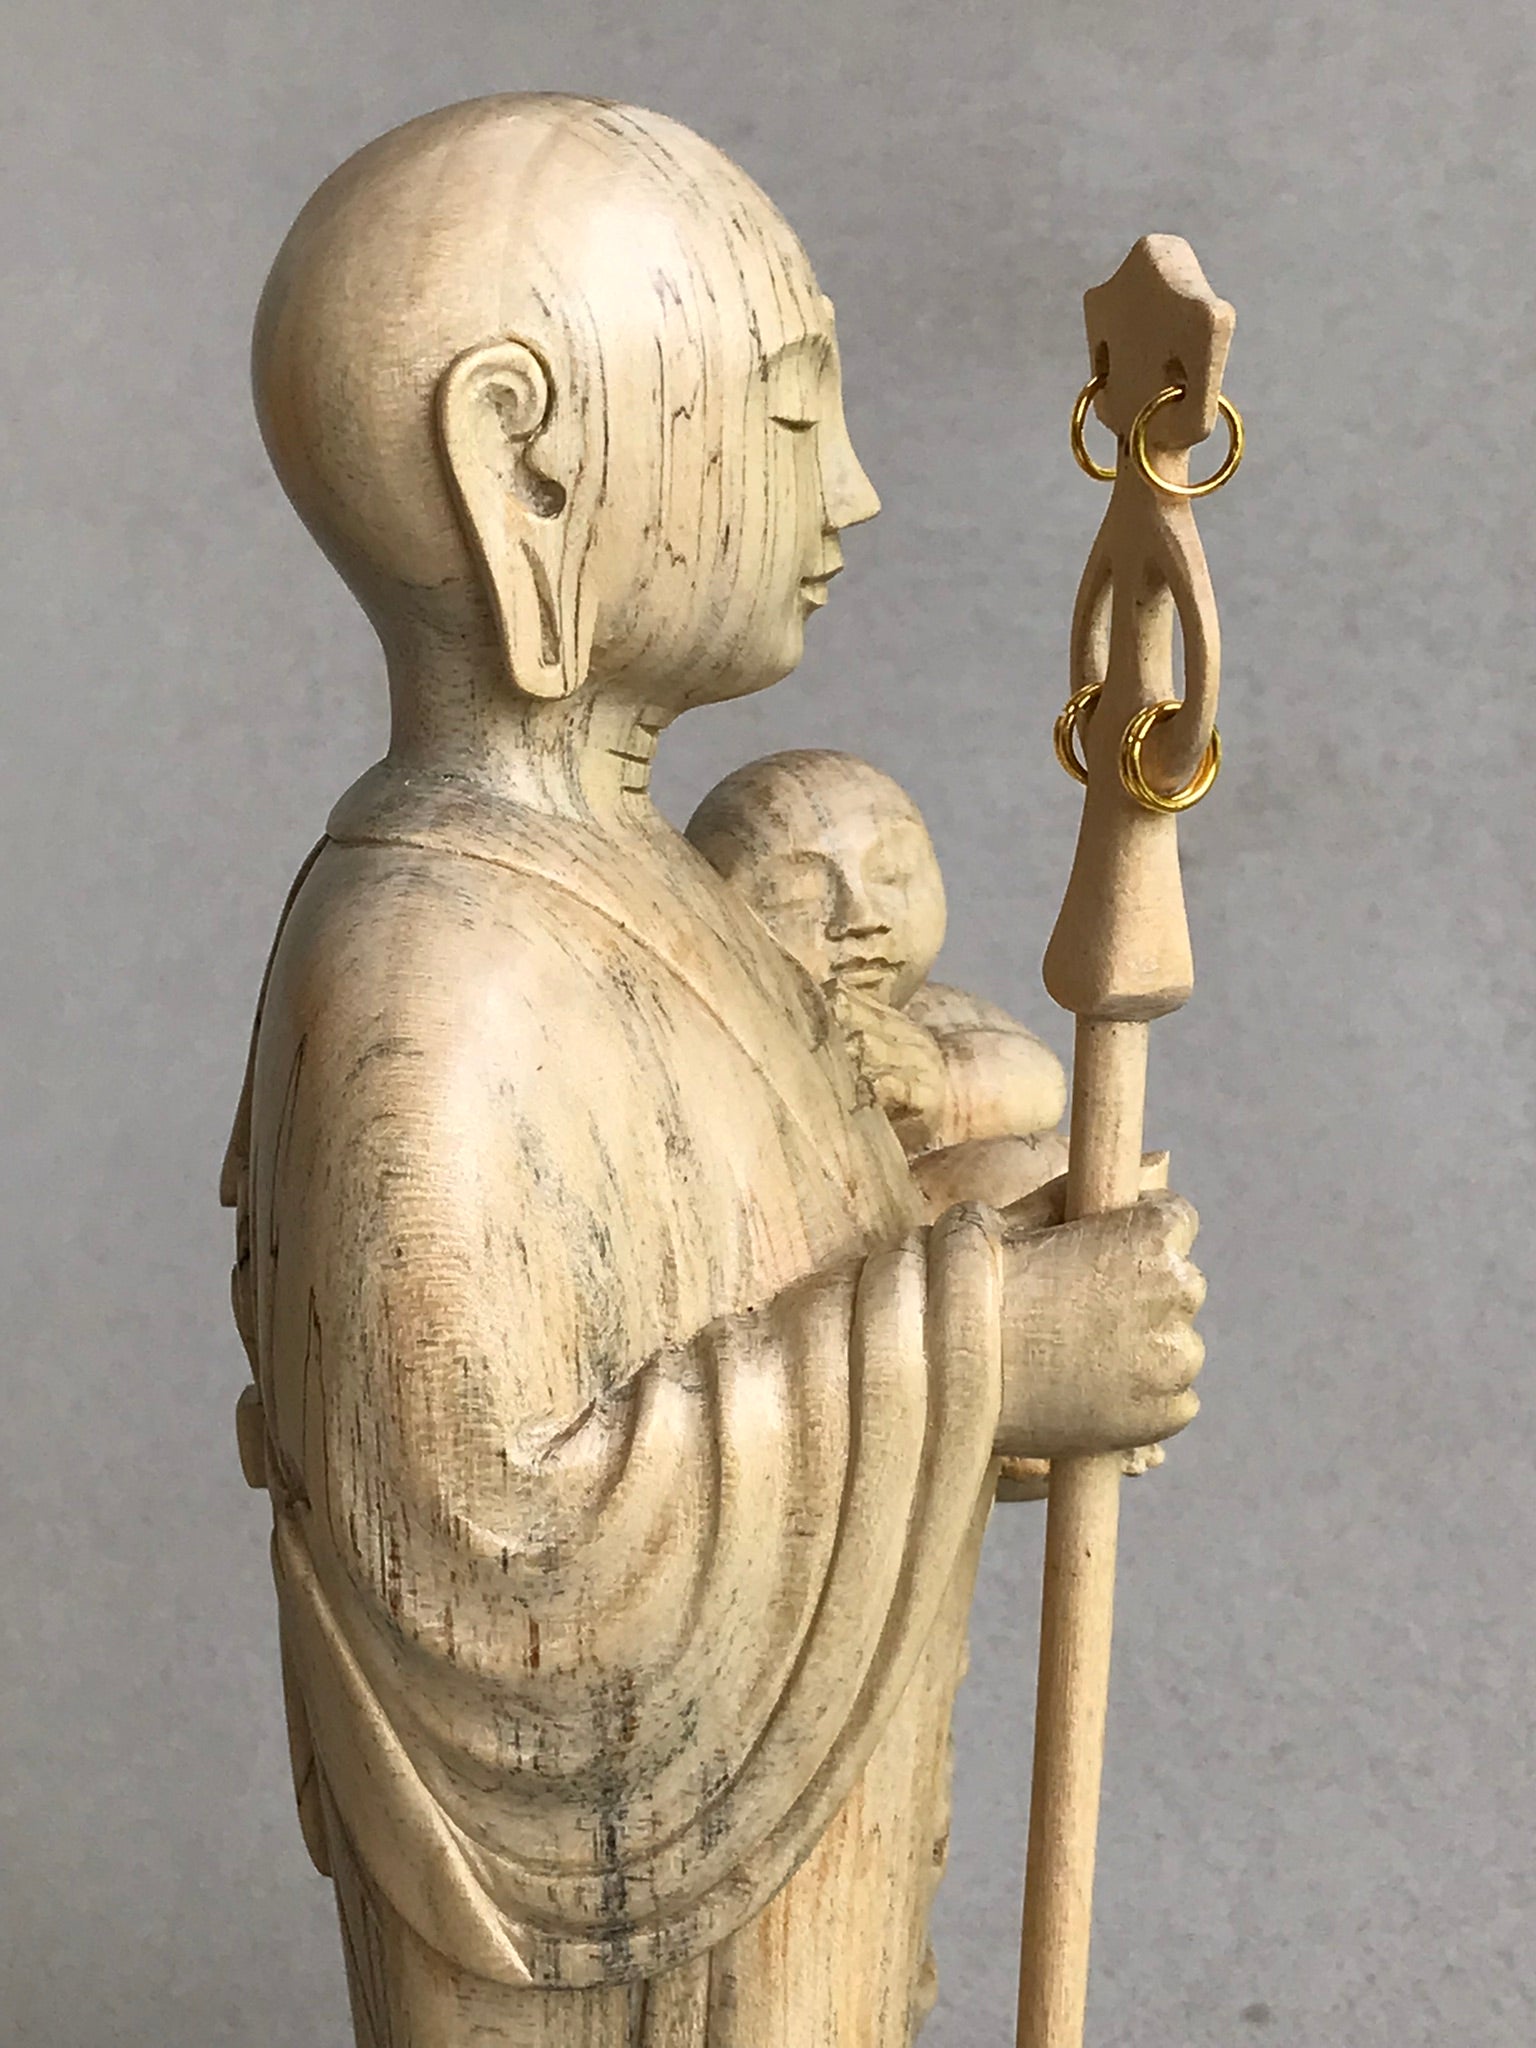 JIzo man standing, holding a staff and a baby, 25cm, 10 inches, color variation in wood from warm light brown to grey grain, close up view of right side.